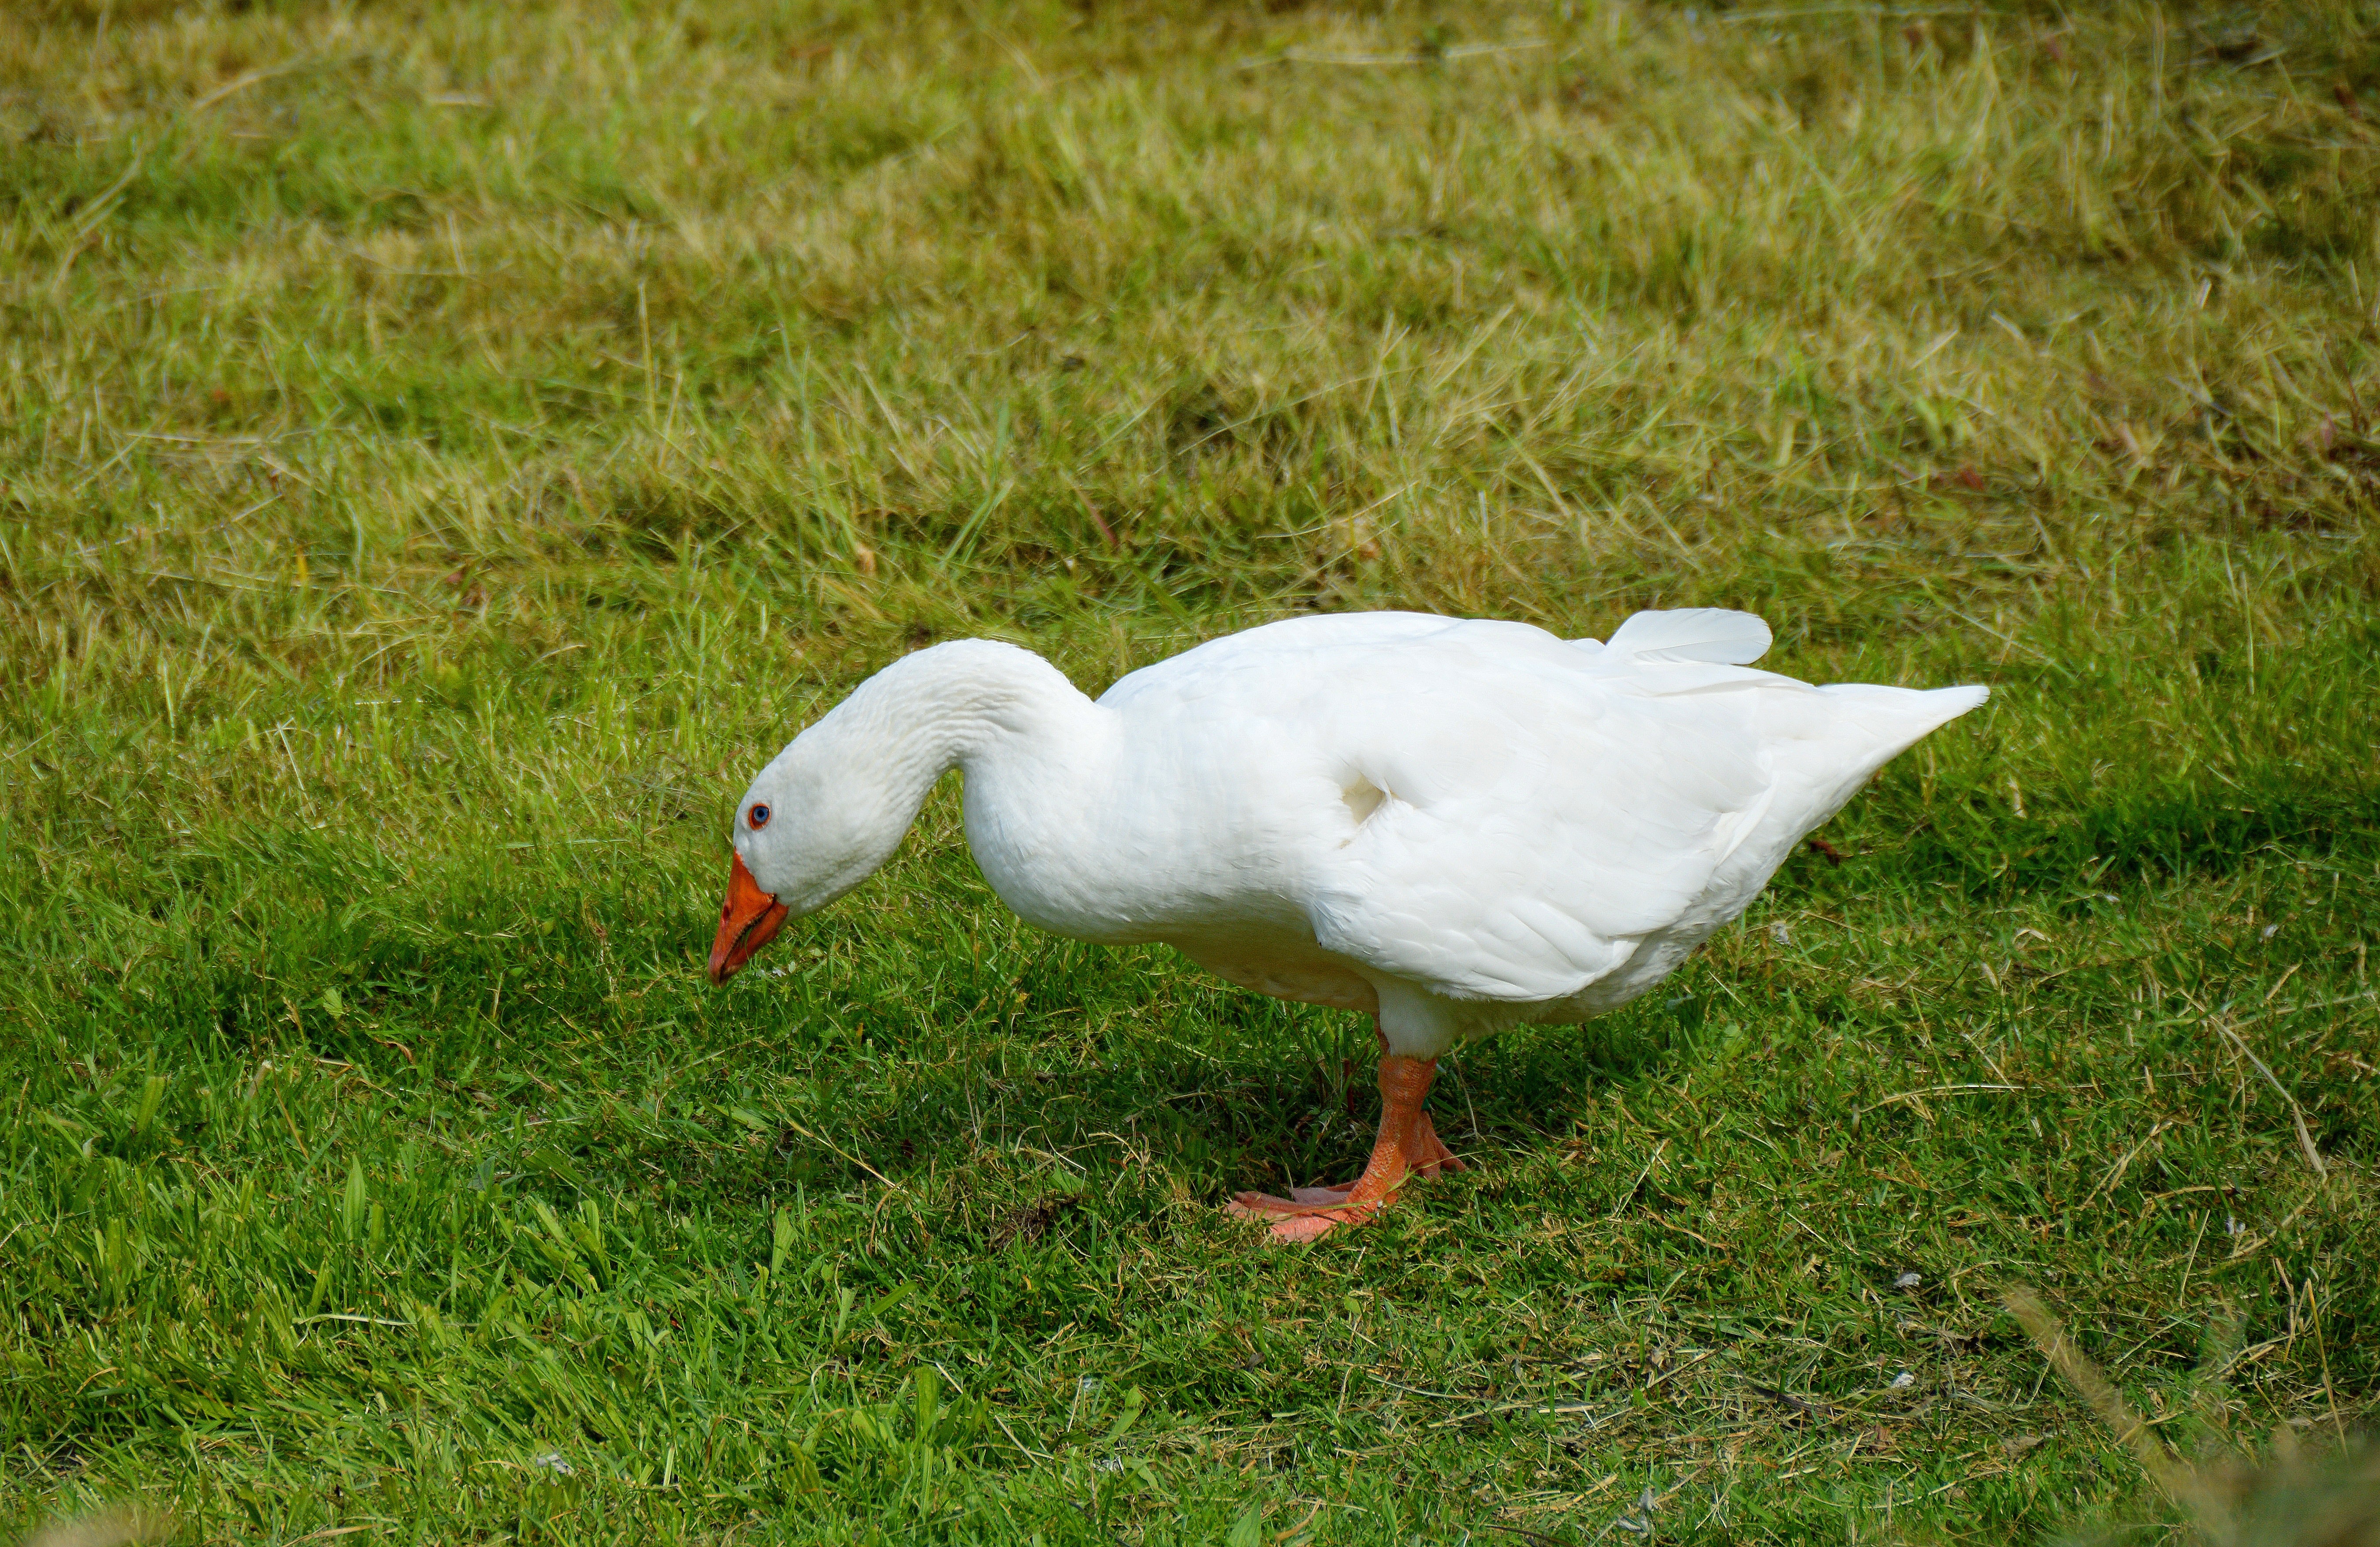 White goose on green grass field during daytime photo